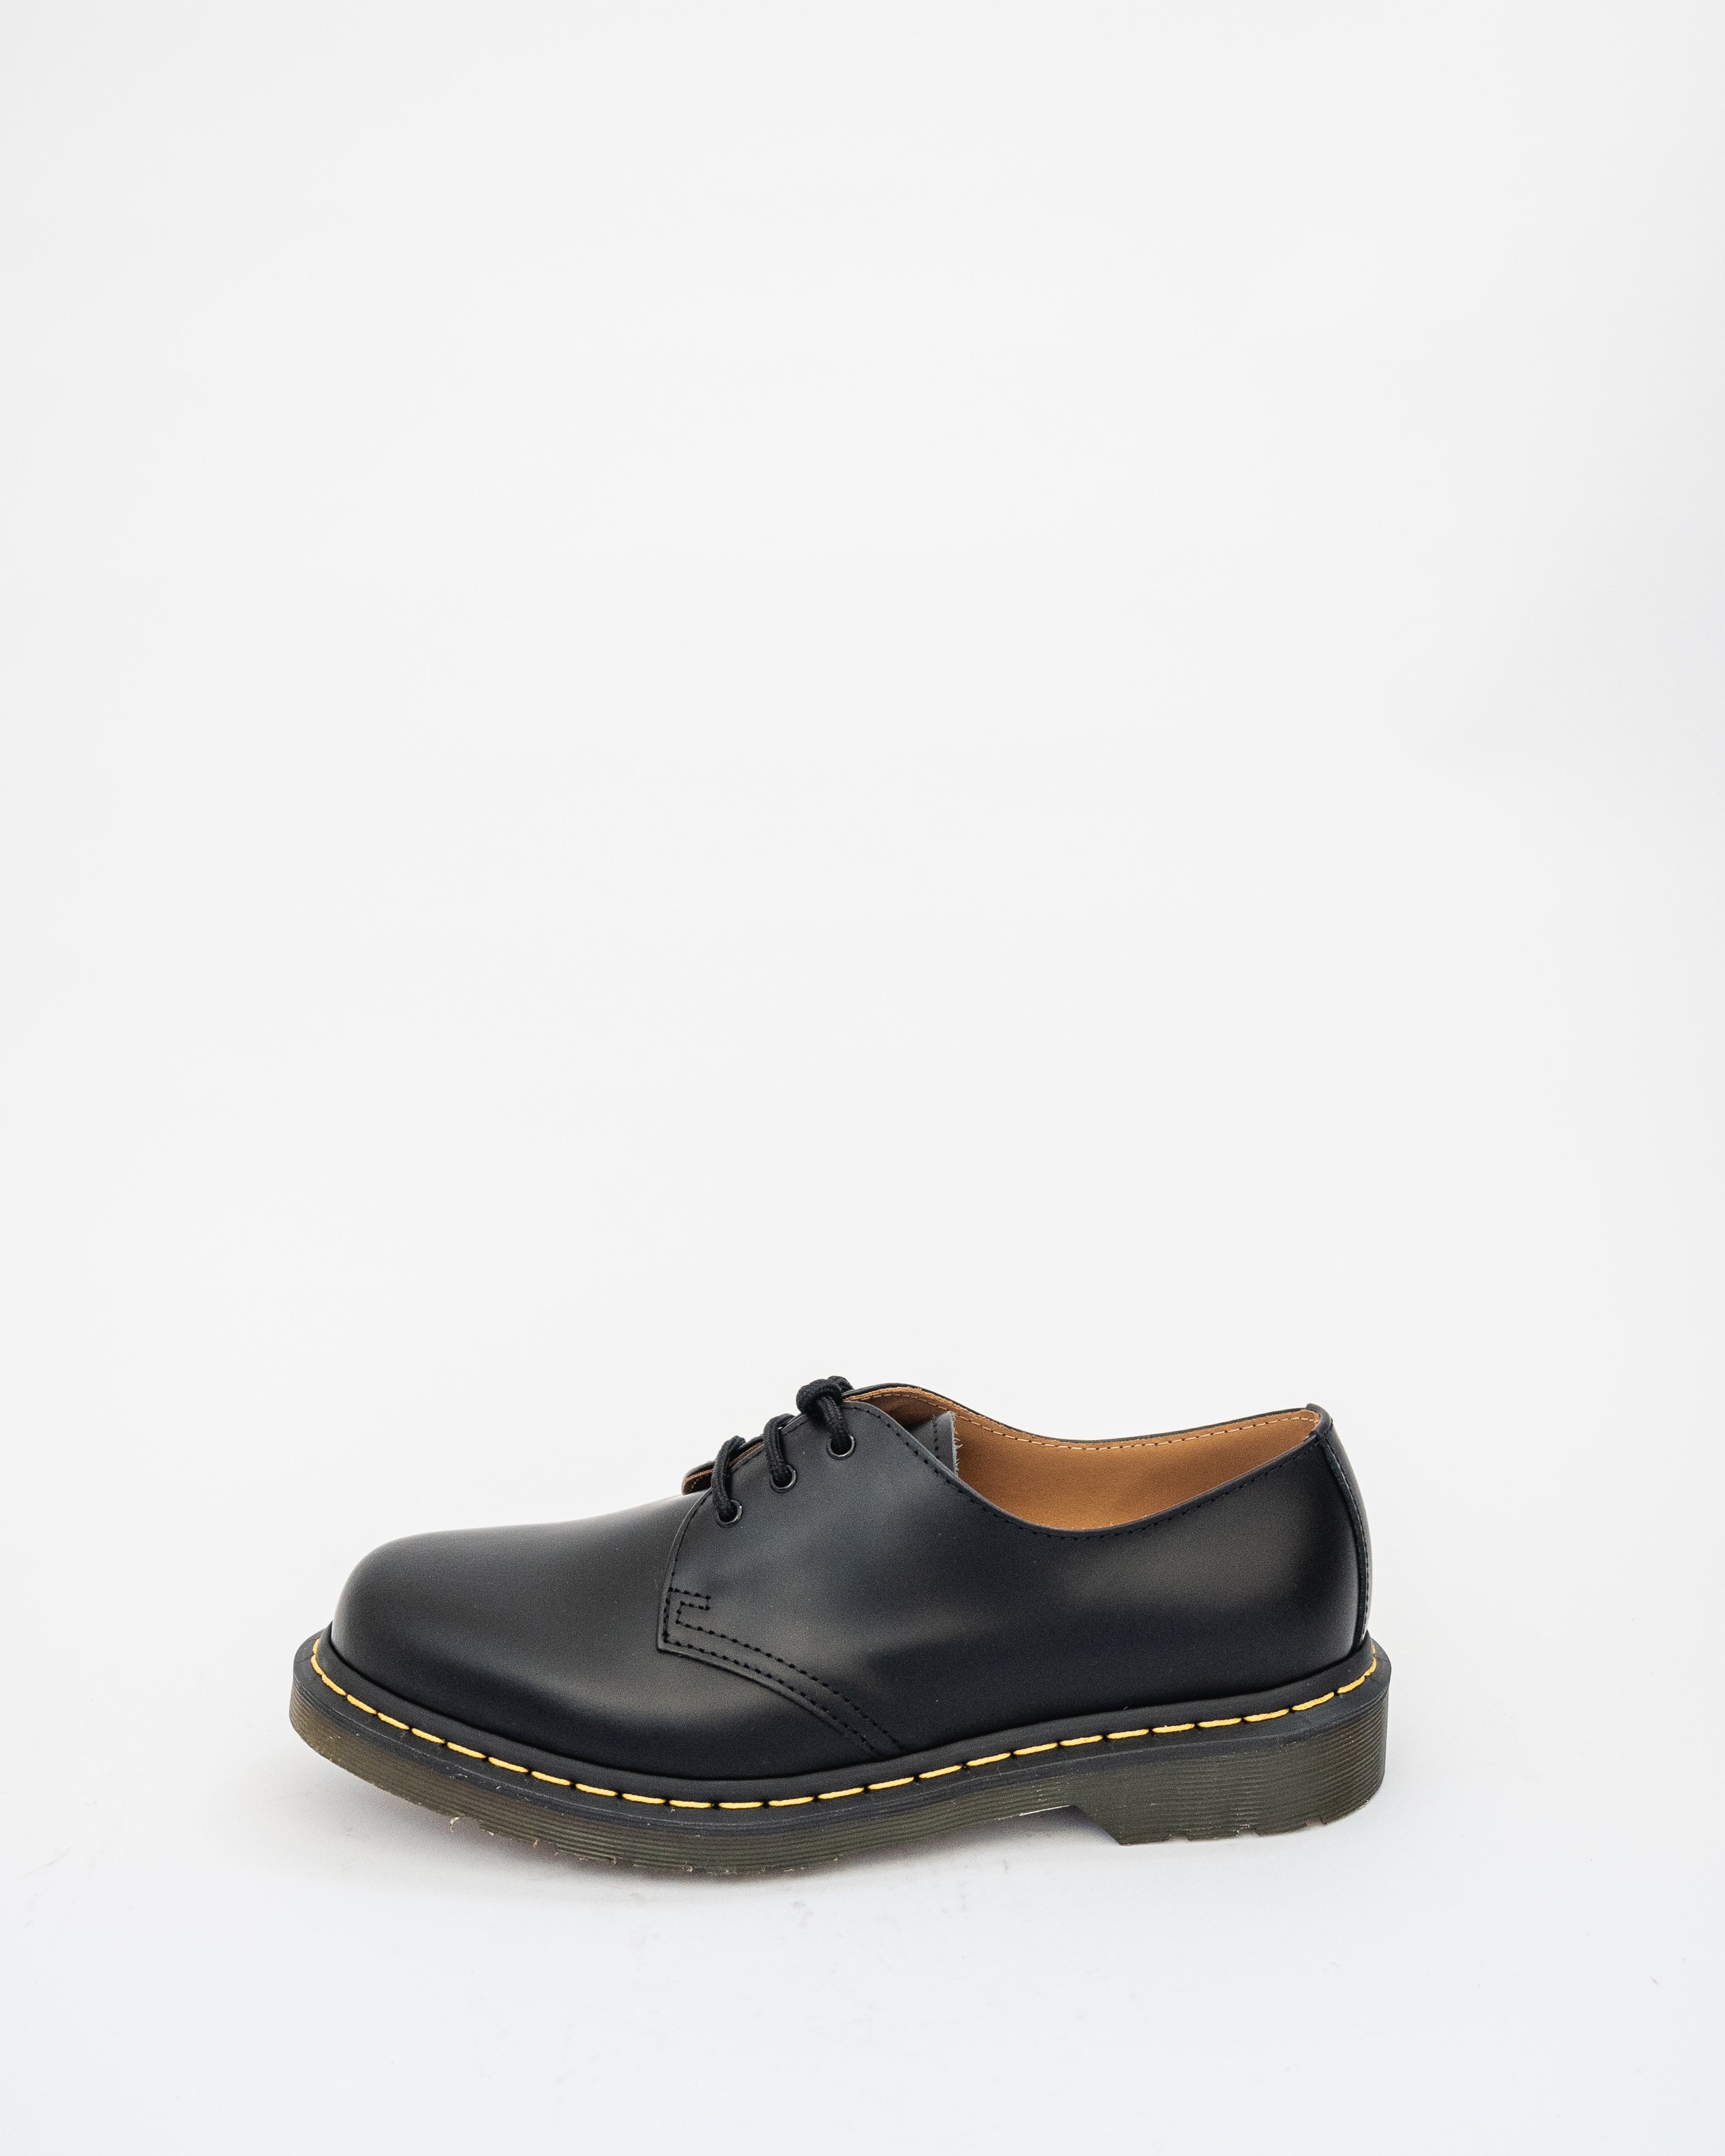 Buy Dr Martens 1461 Mono Lace Up Shoes - Unisex with Fast Shipping - Brand  House Direct